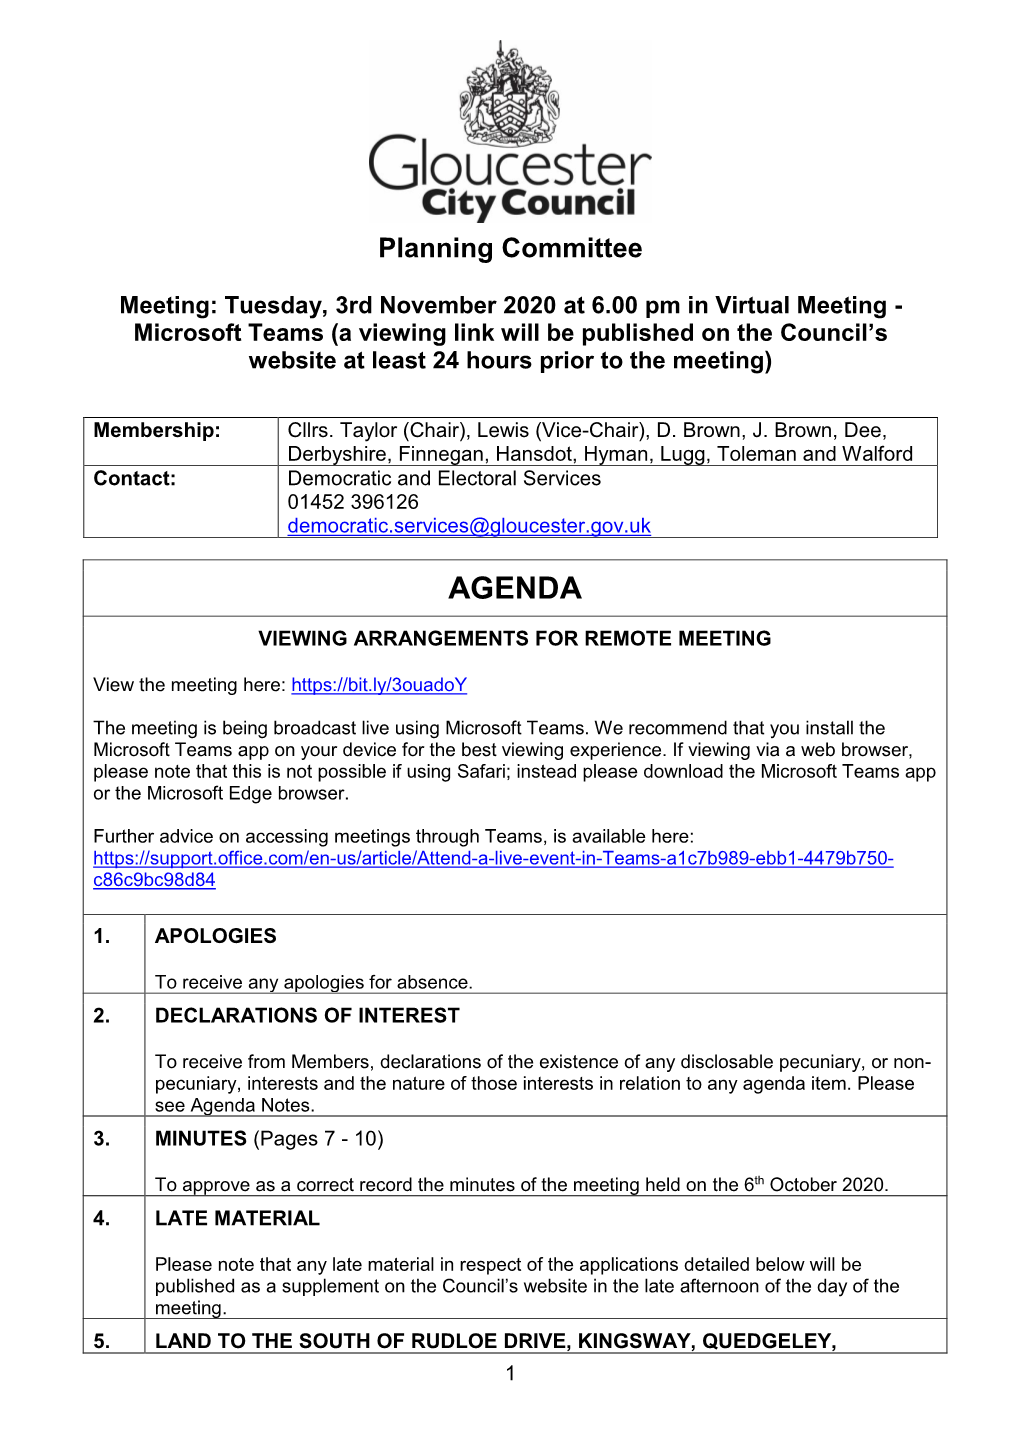 (Public Pack)Agenda Document for Planning Committee, 03/11/2020